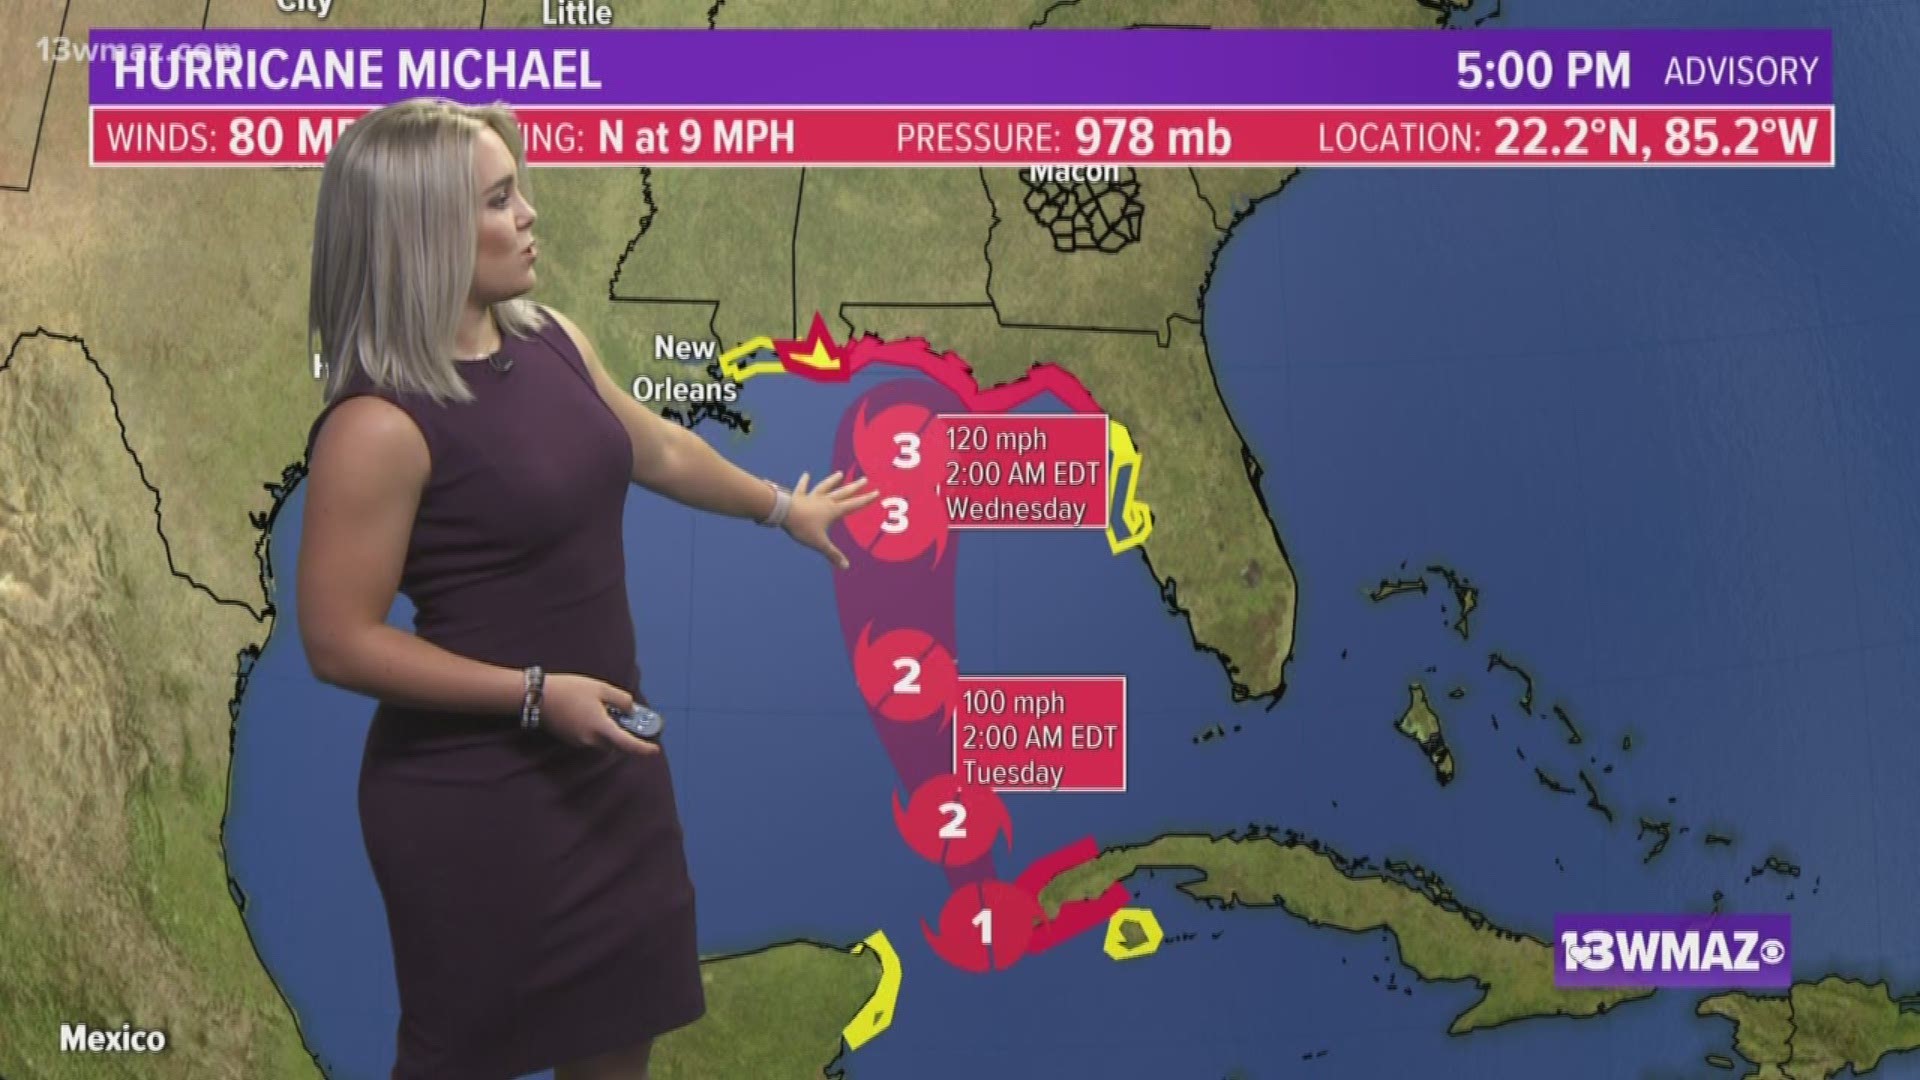 Meteorologist Courteney Jacobazzi explains the possible impacts of Hurricane Michael on Central Georgia